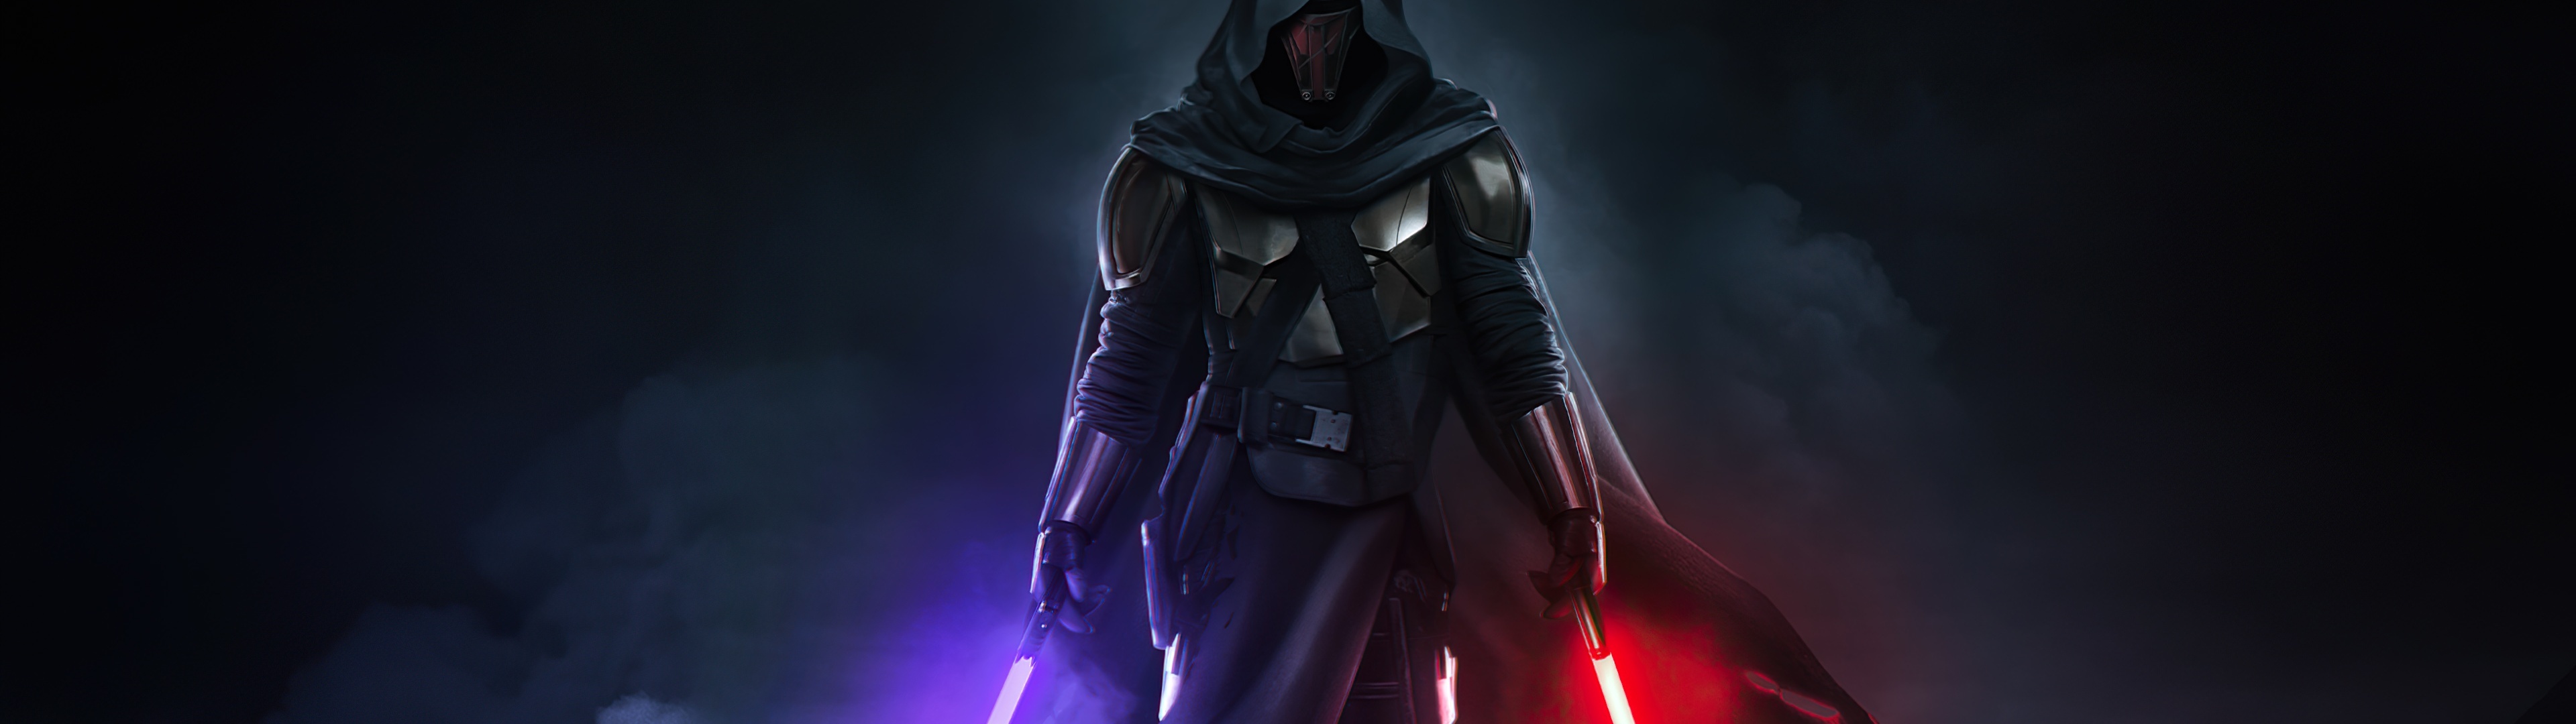 Darth Revan: Was captured by the Jedi Order and had his memories erased, Lightsaber. 3840x1080 Dual Screen Background.